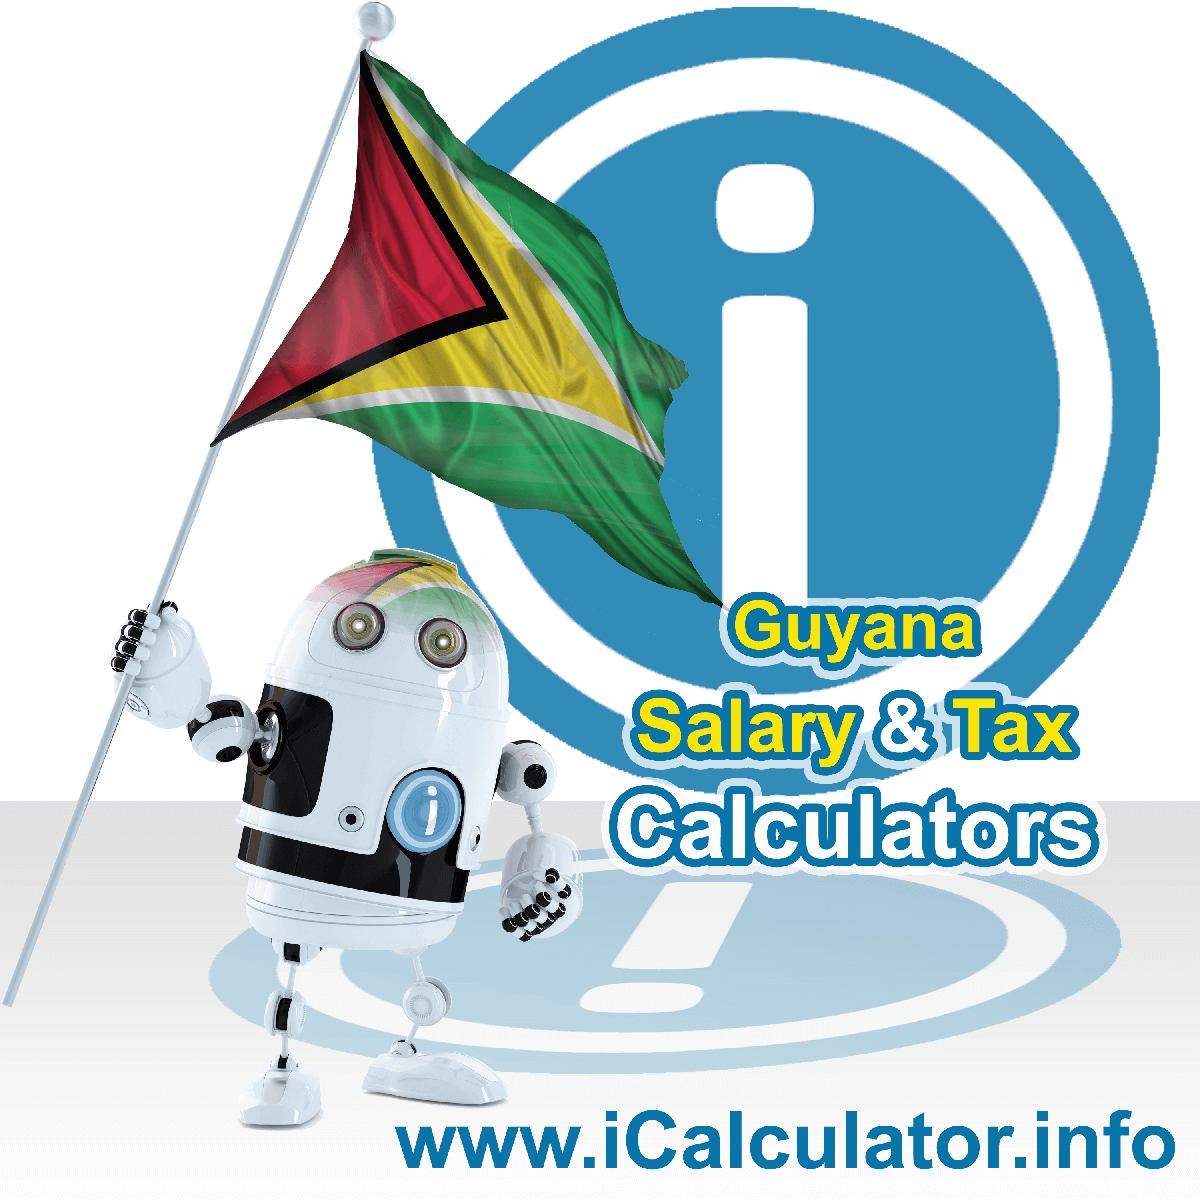 Guyana Tax Calculator. This image shows the Guyana flag and information relating to the tax formula for the Guyana Salary Calculator